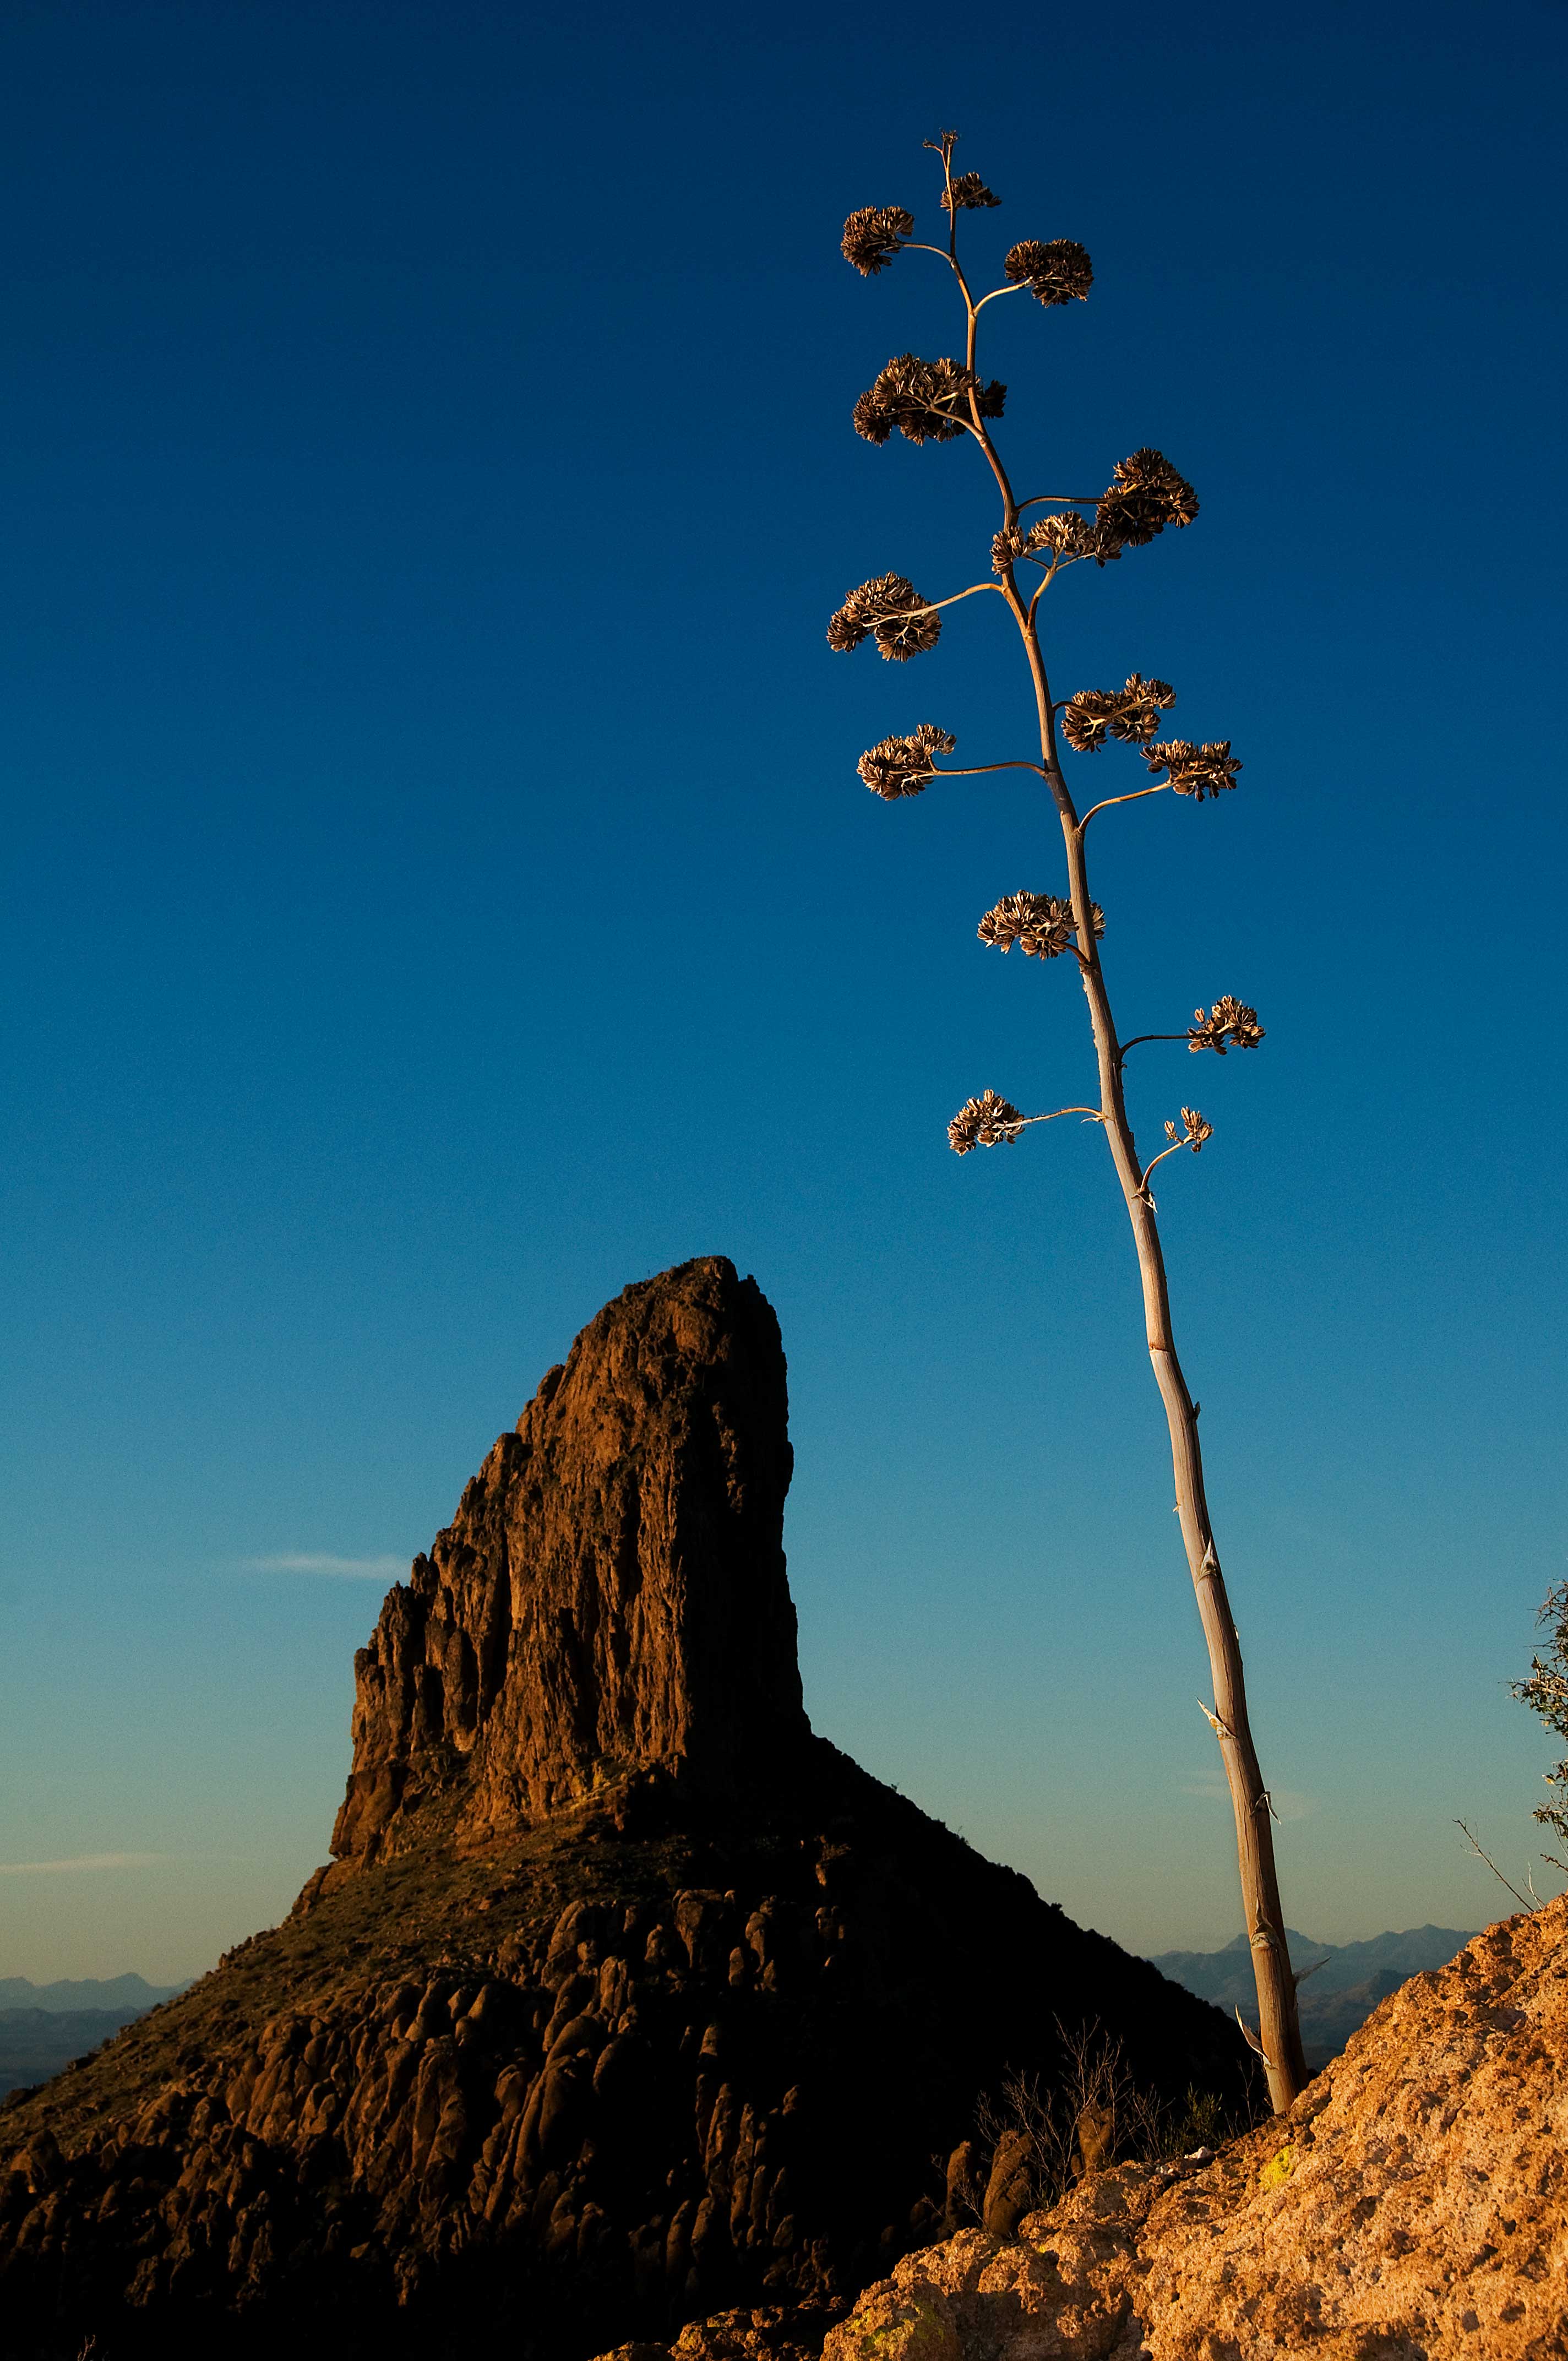 Weaver's Needle with century plant in the Superstition Mts., Arizona